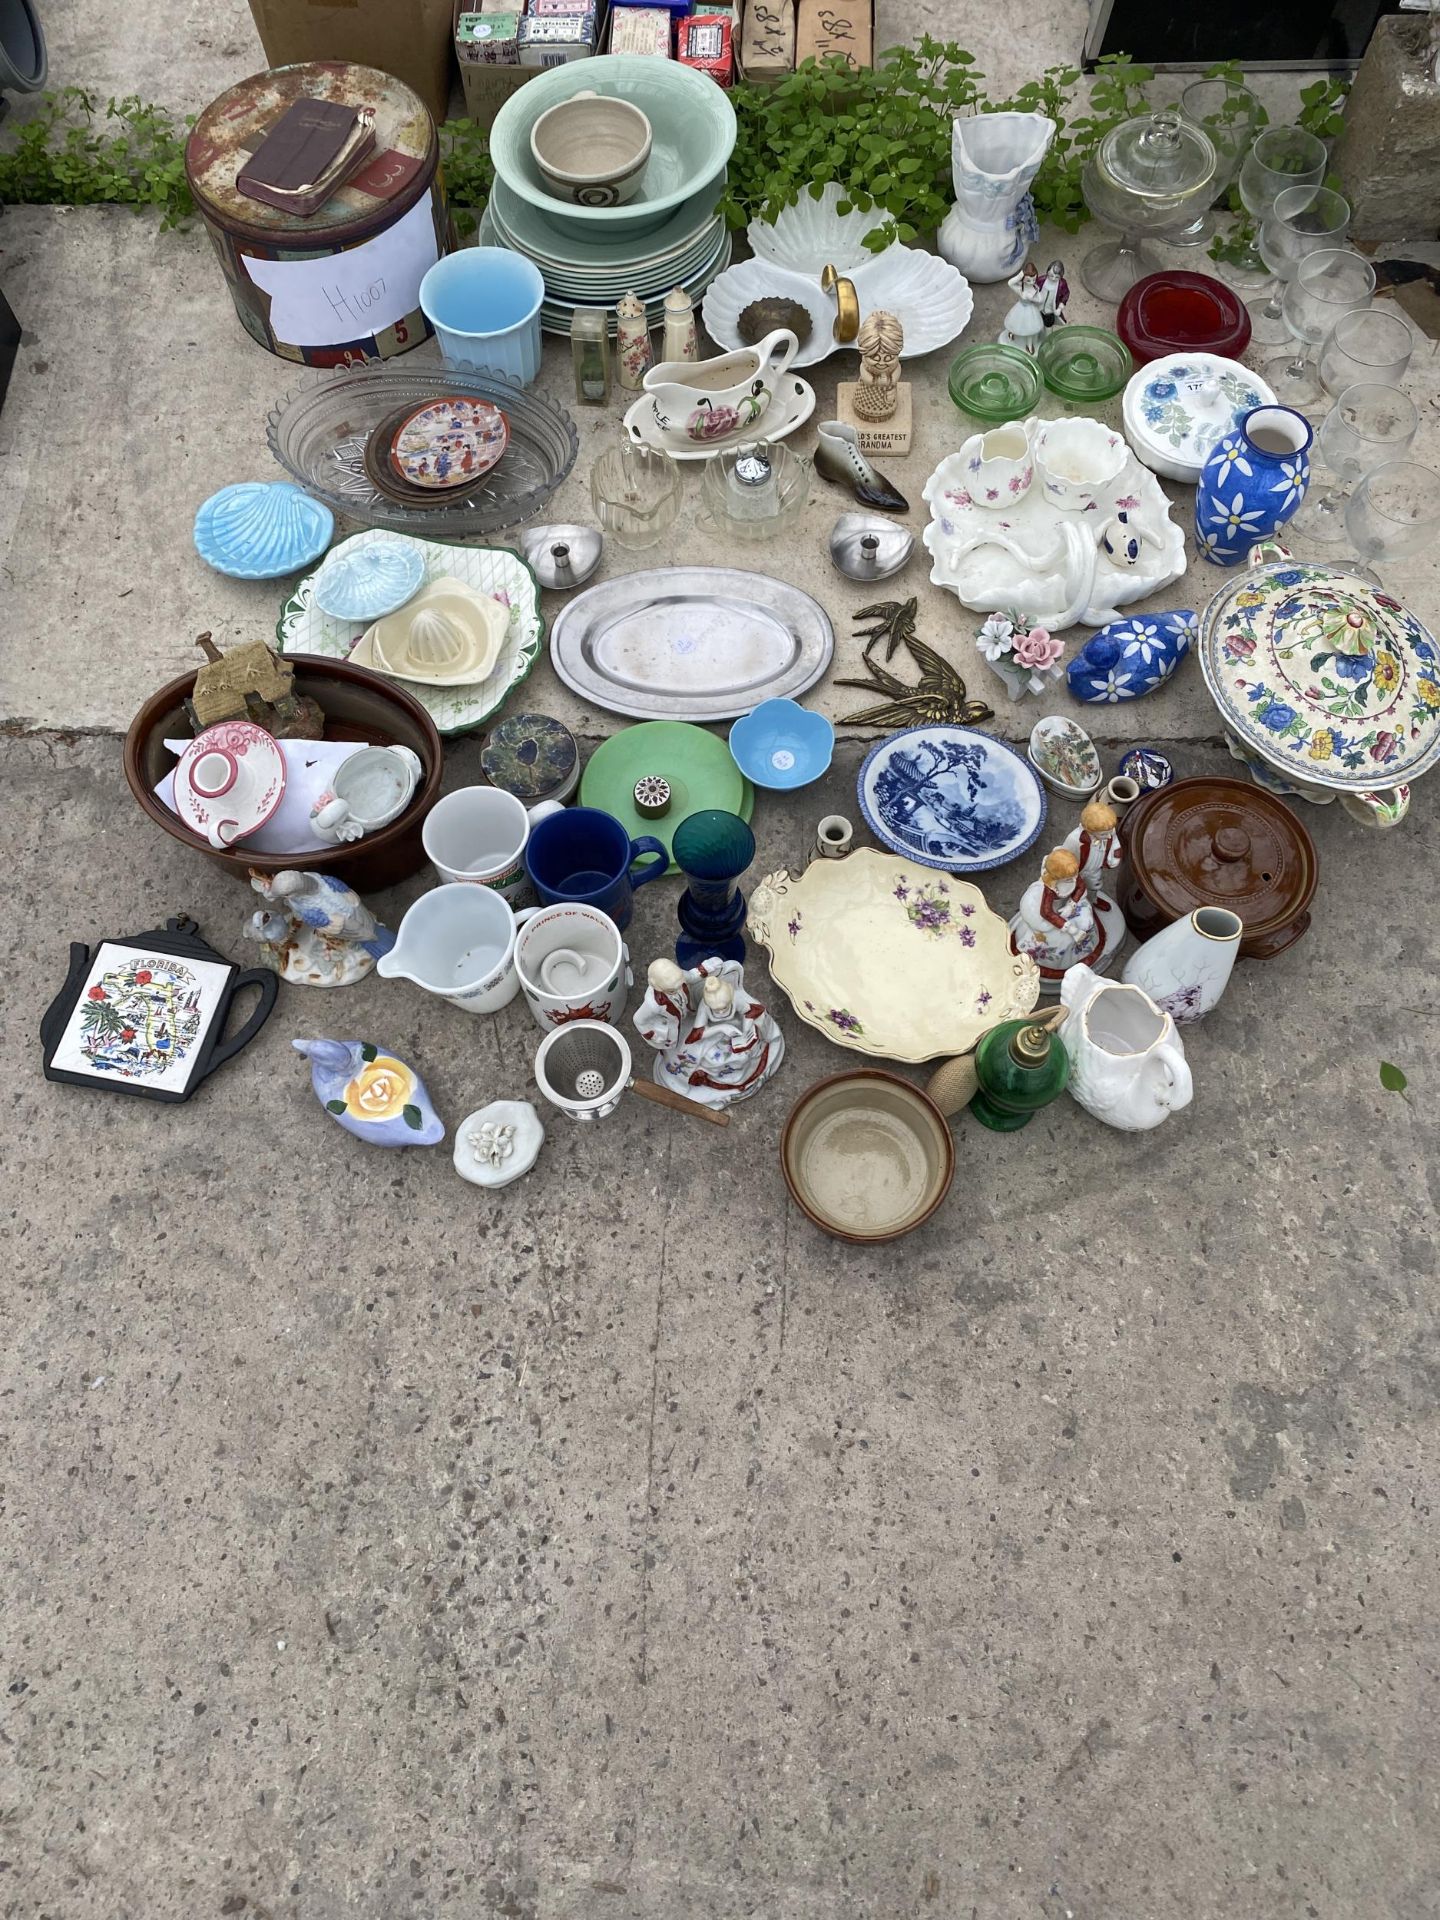 AN ASSORTMENT OF GLASS AND CERAMIC ITEMS TO INCLUDE BOWLS AND VASES ETC